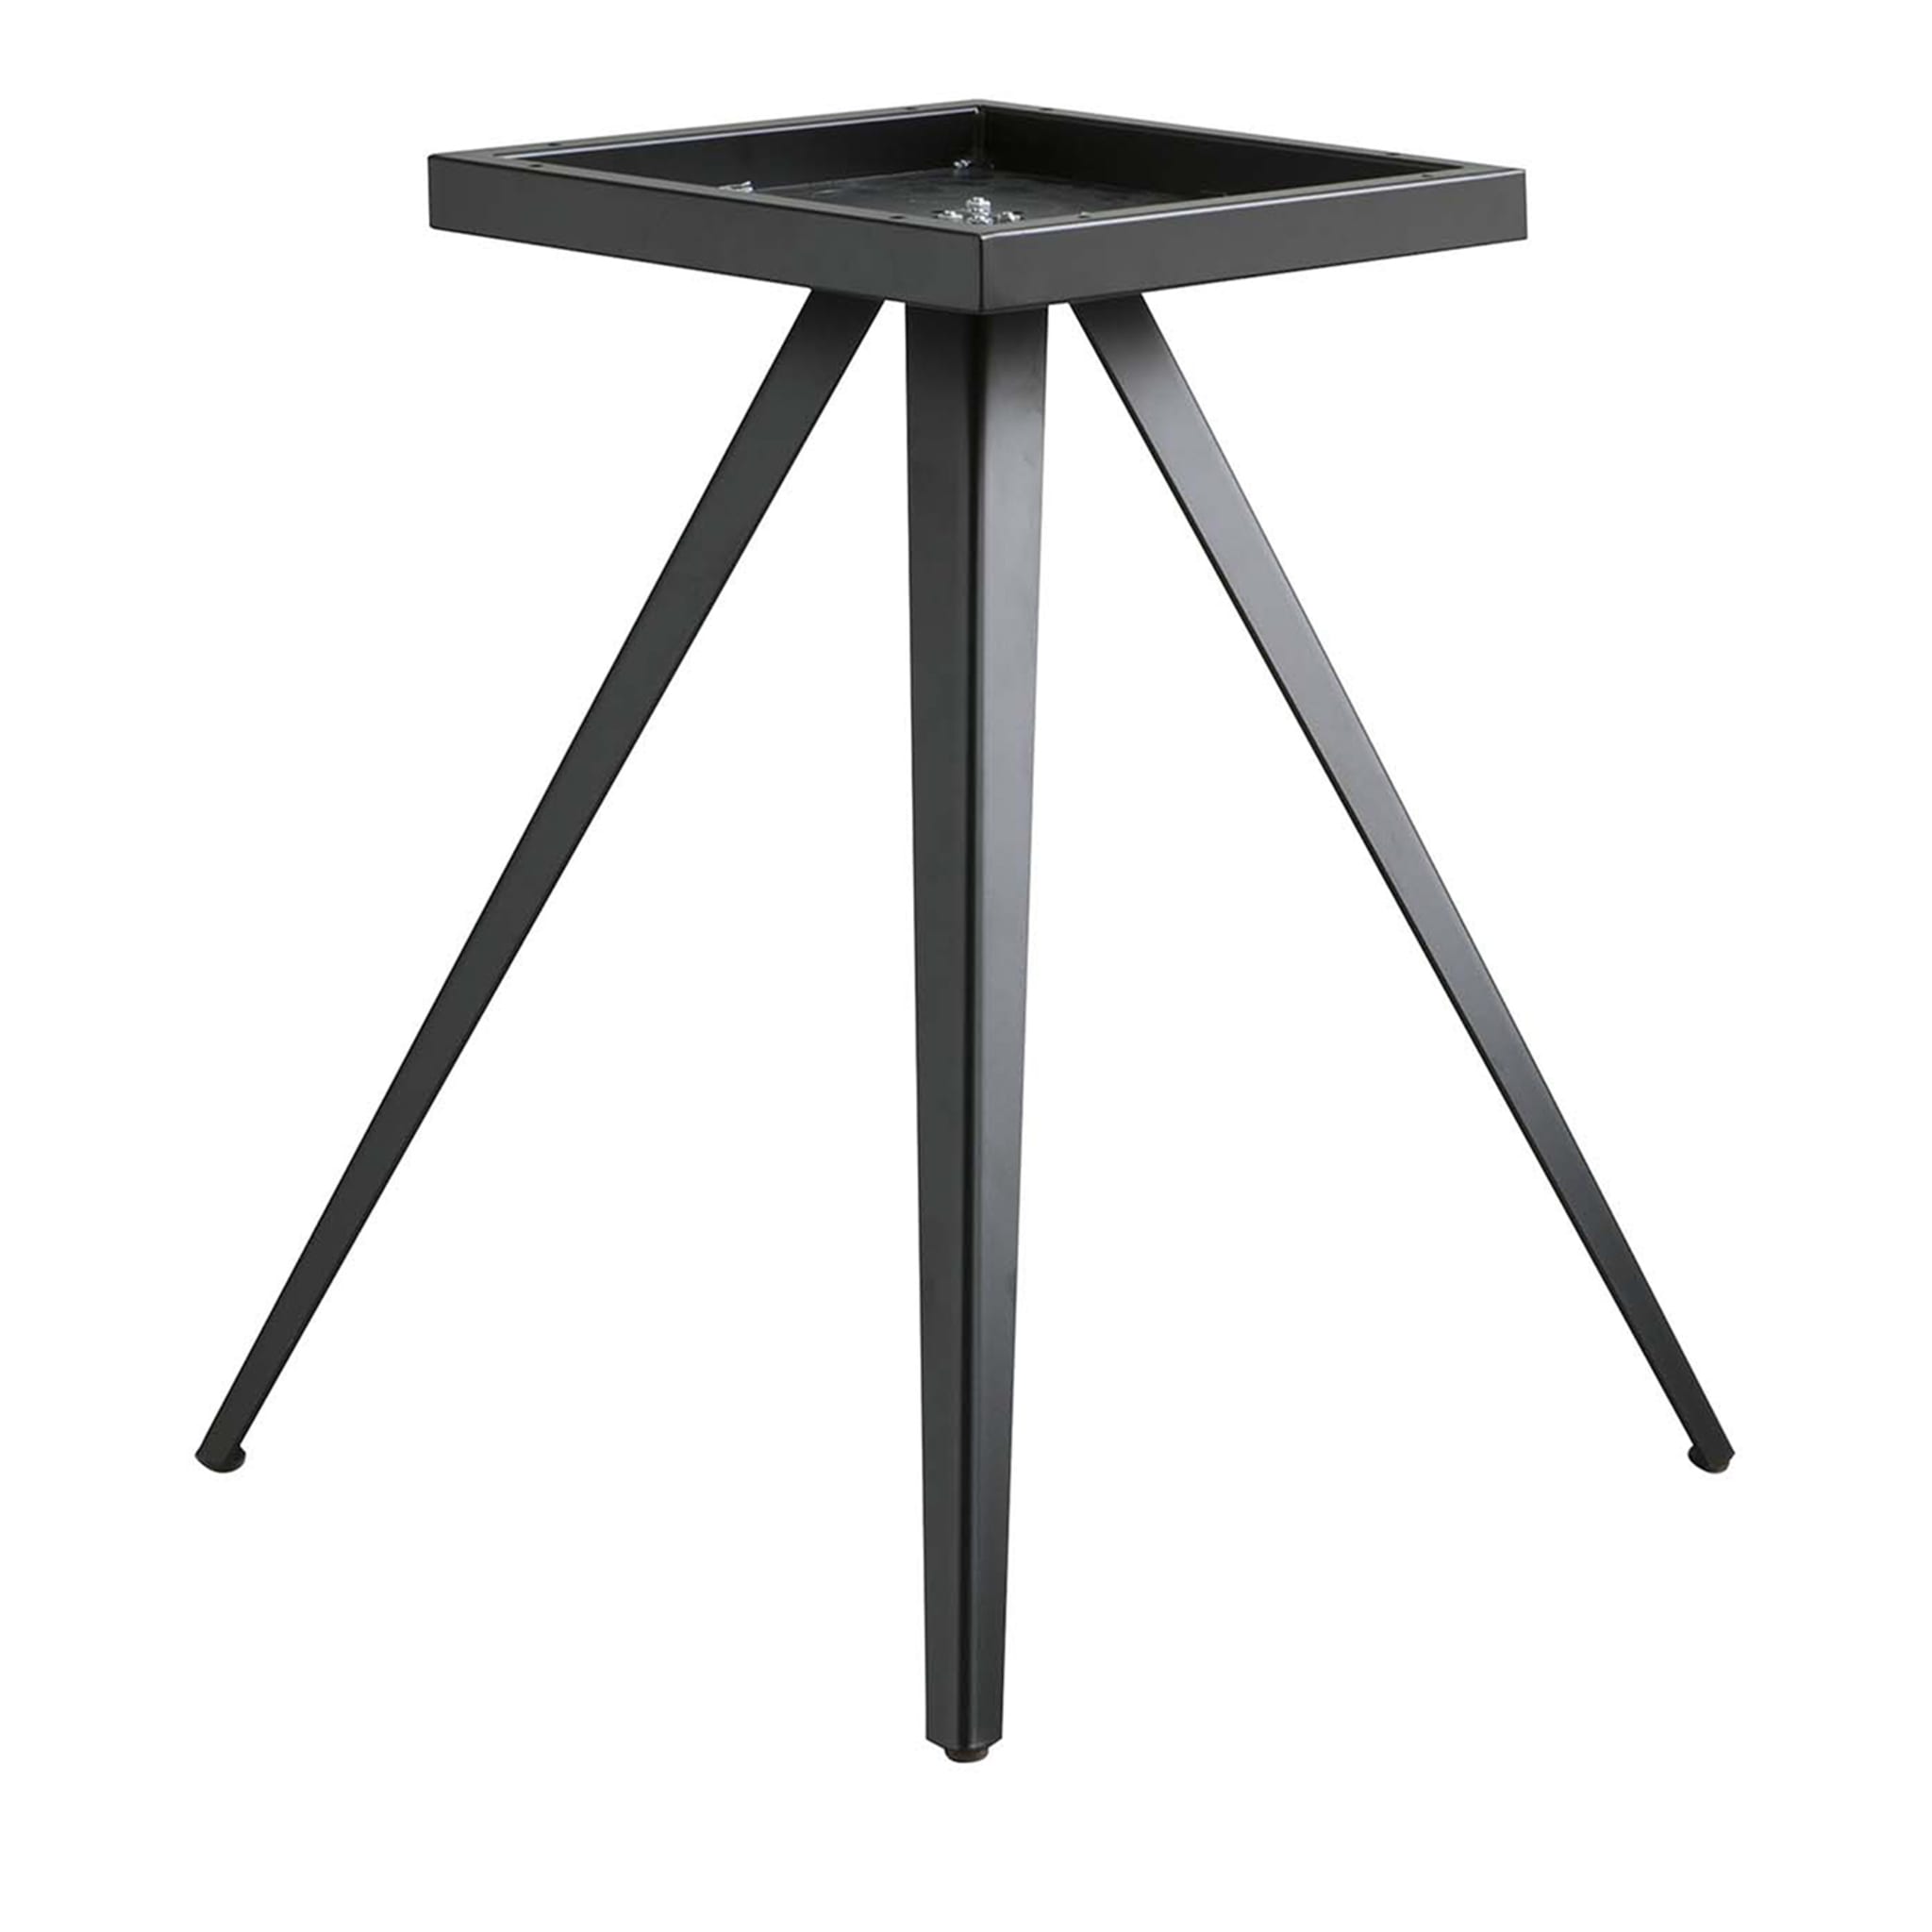 Aky Contract Met Table by Emilio Nanni - Main view